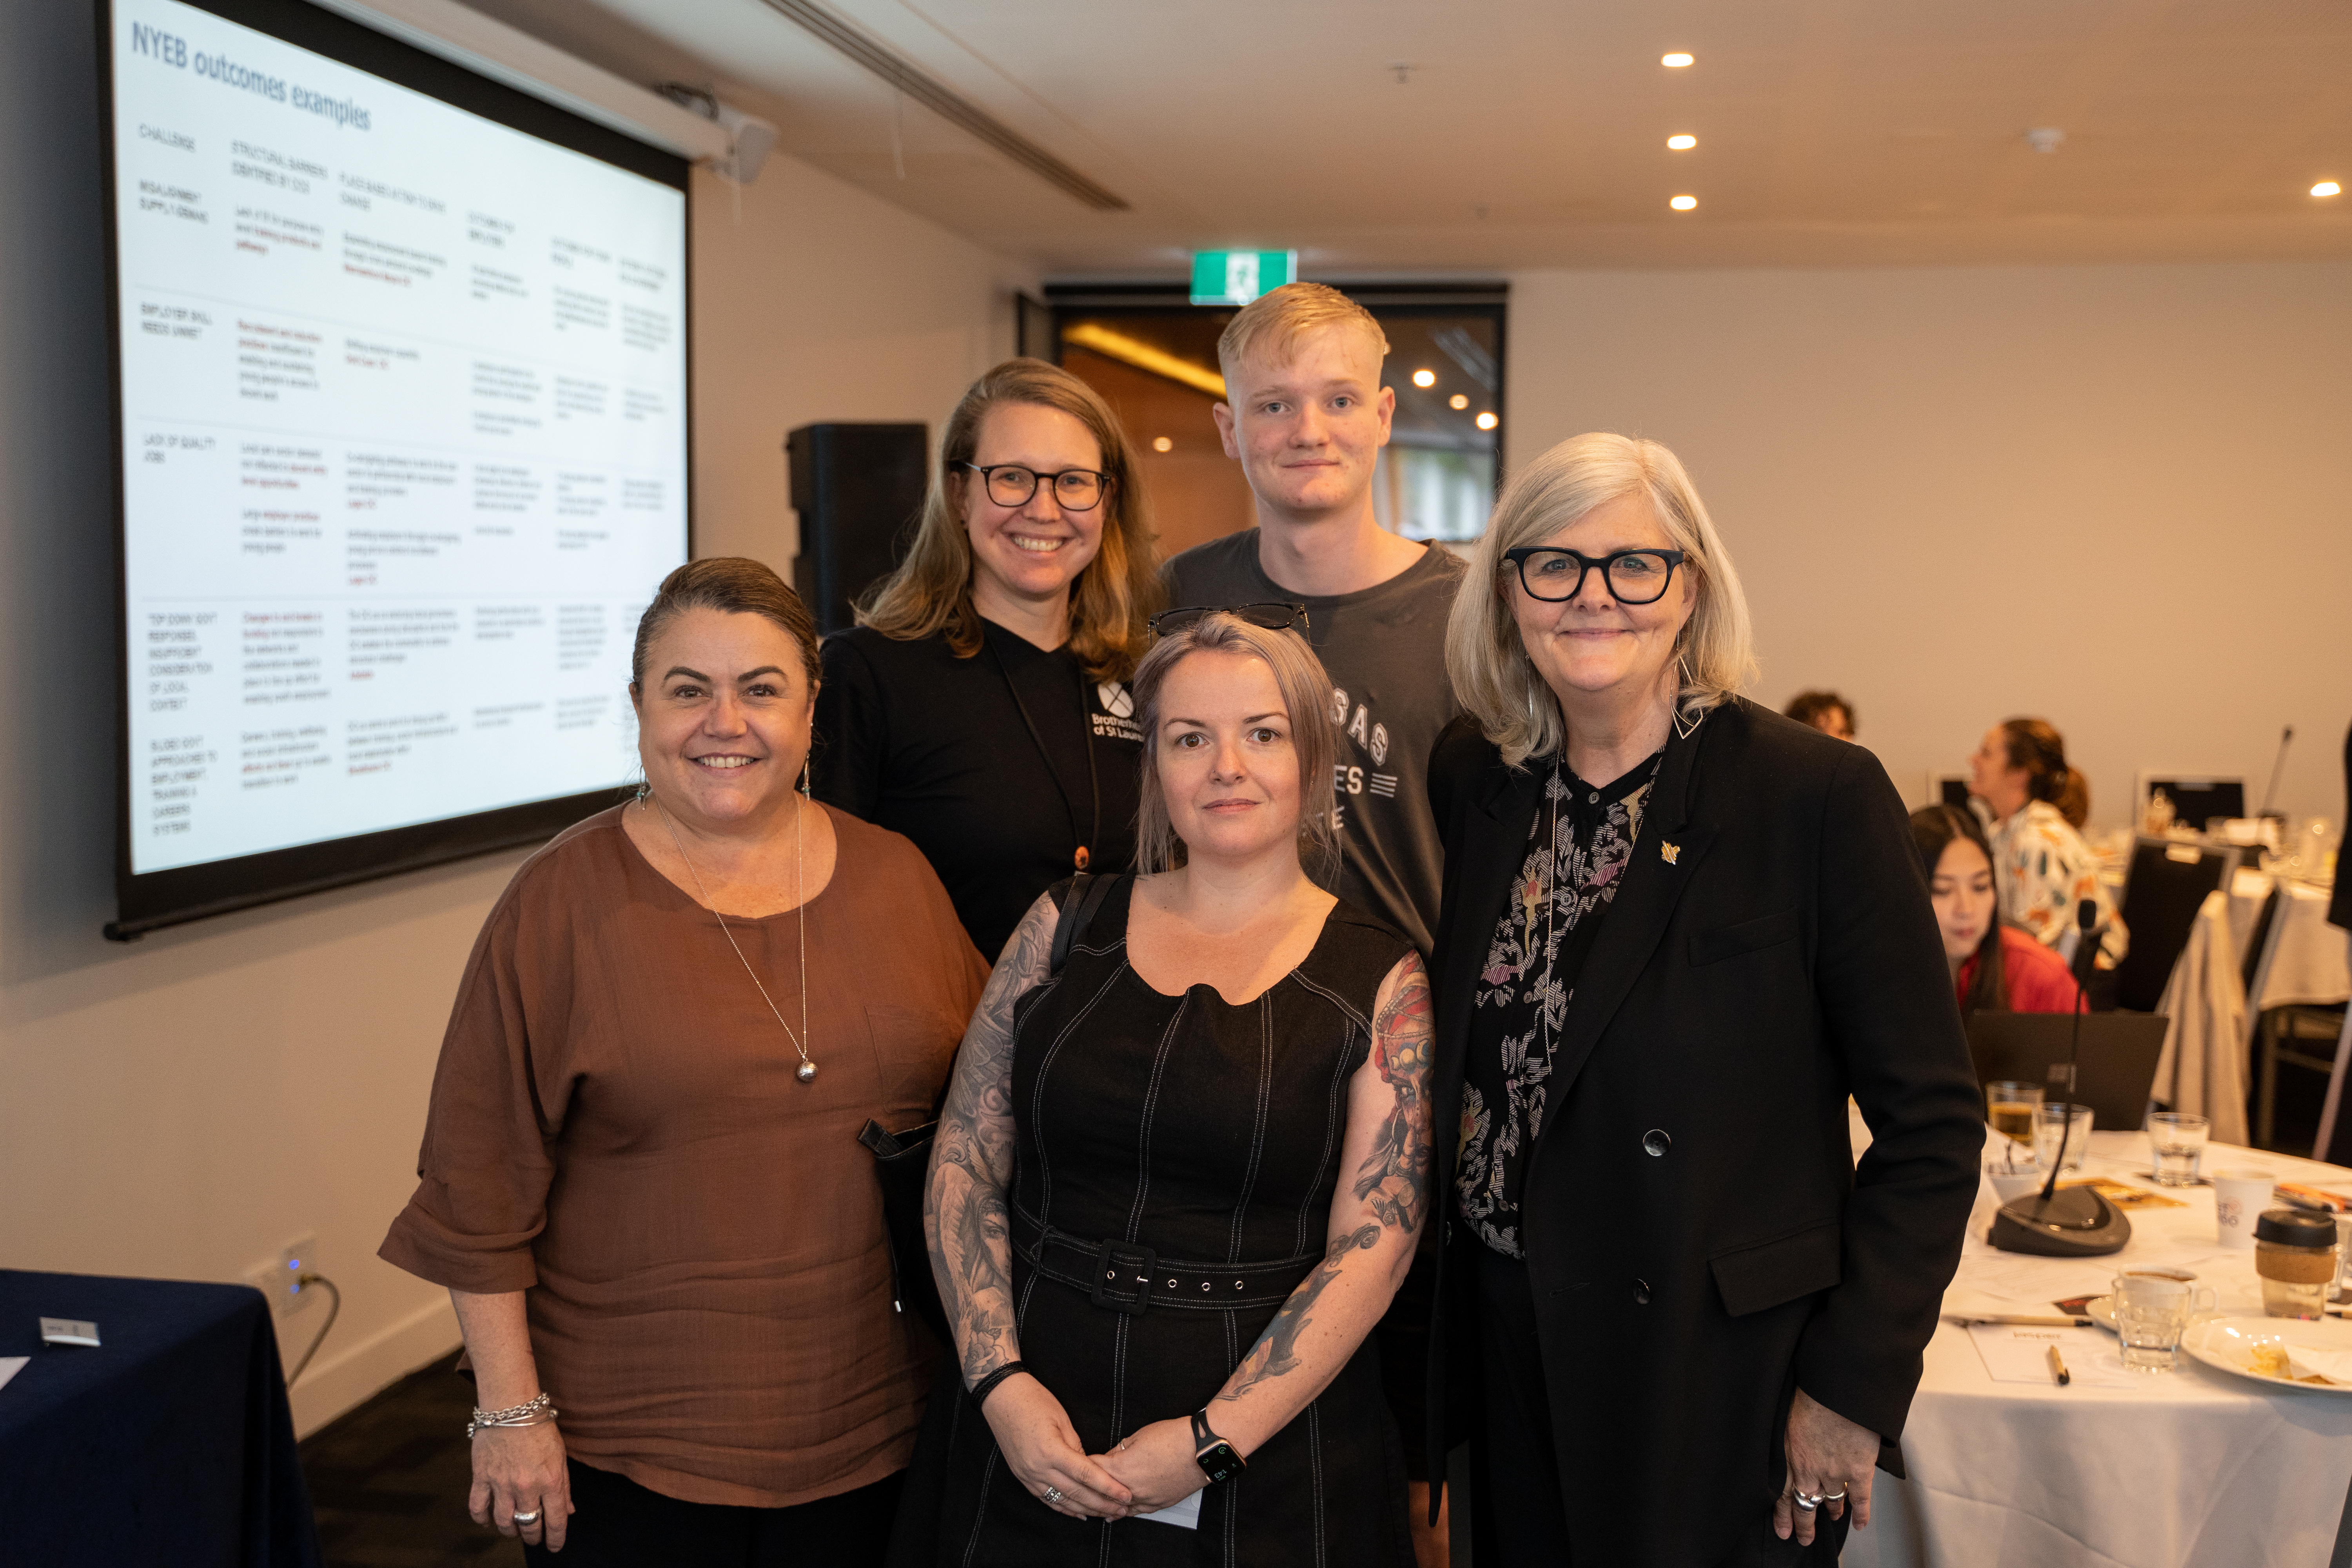 Sam Mostyn AO (far right) with participants from BSL’s National Youth Employment Body program